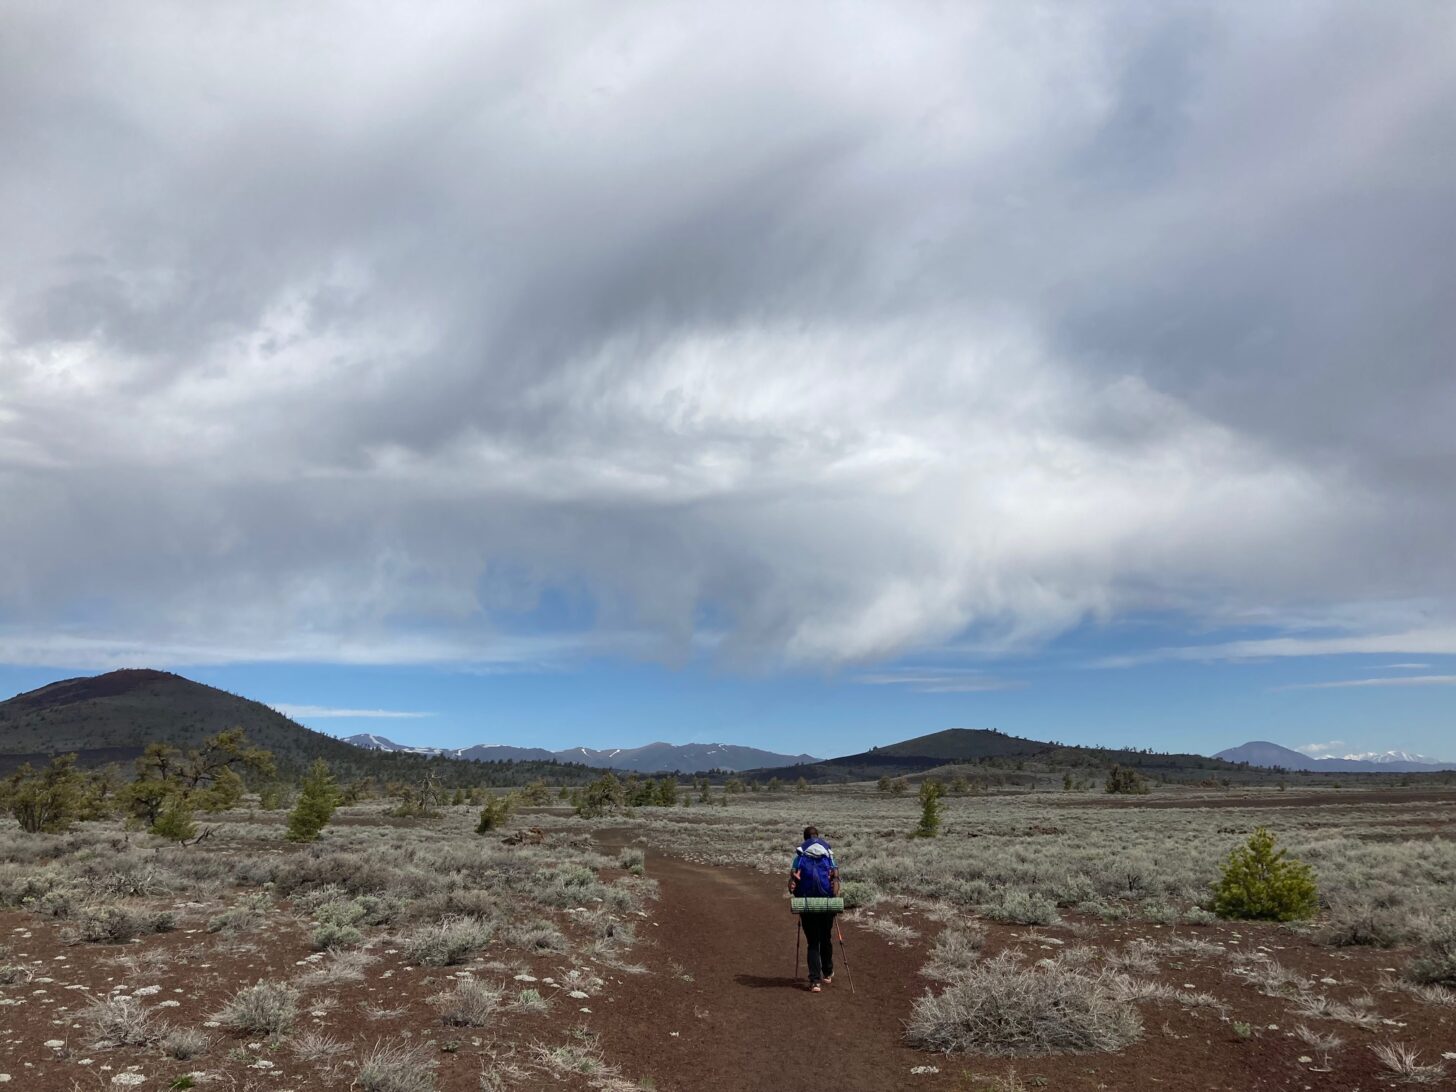 A backpacker hikes through a sagebrush flat with mountains in the distance and clouds above.